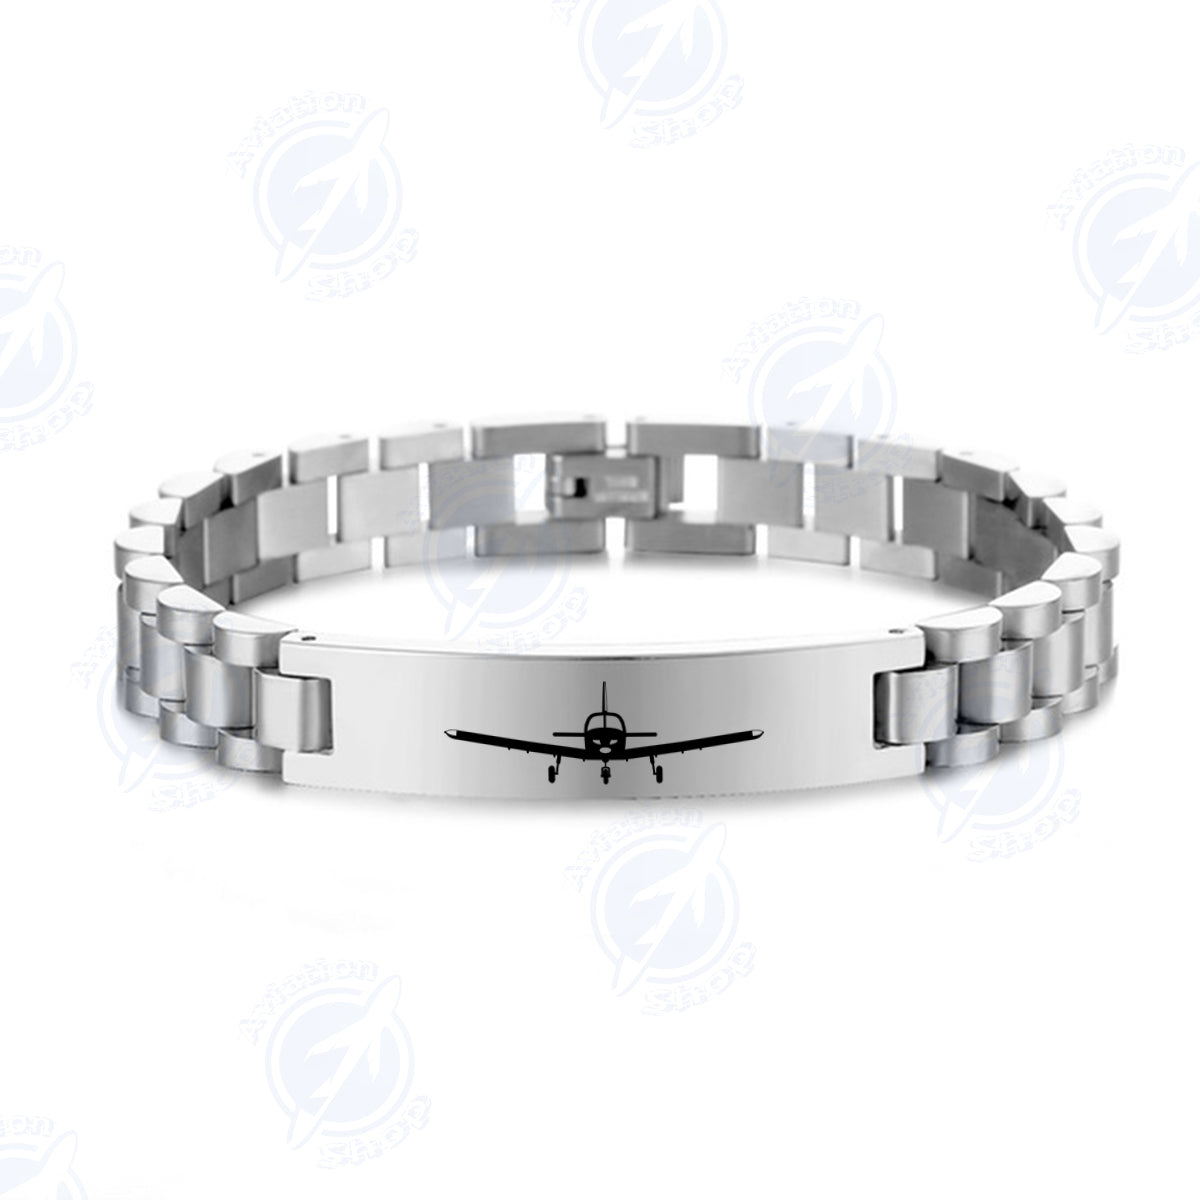 Piper PA28 Silhouette Plane Designed Stainless Steel Chain Bracelets